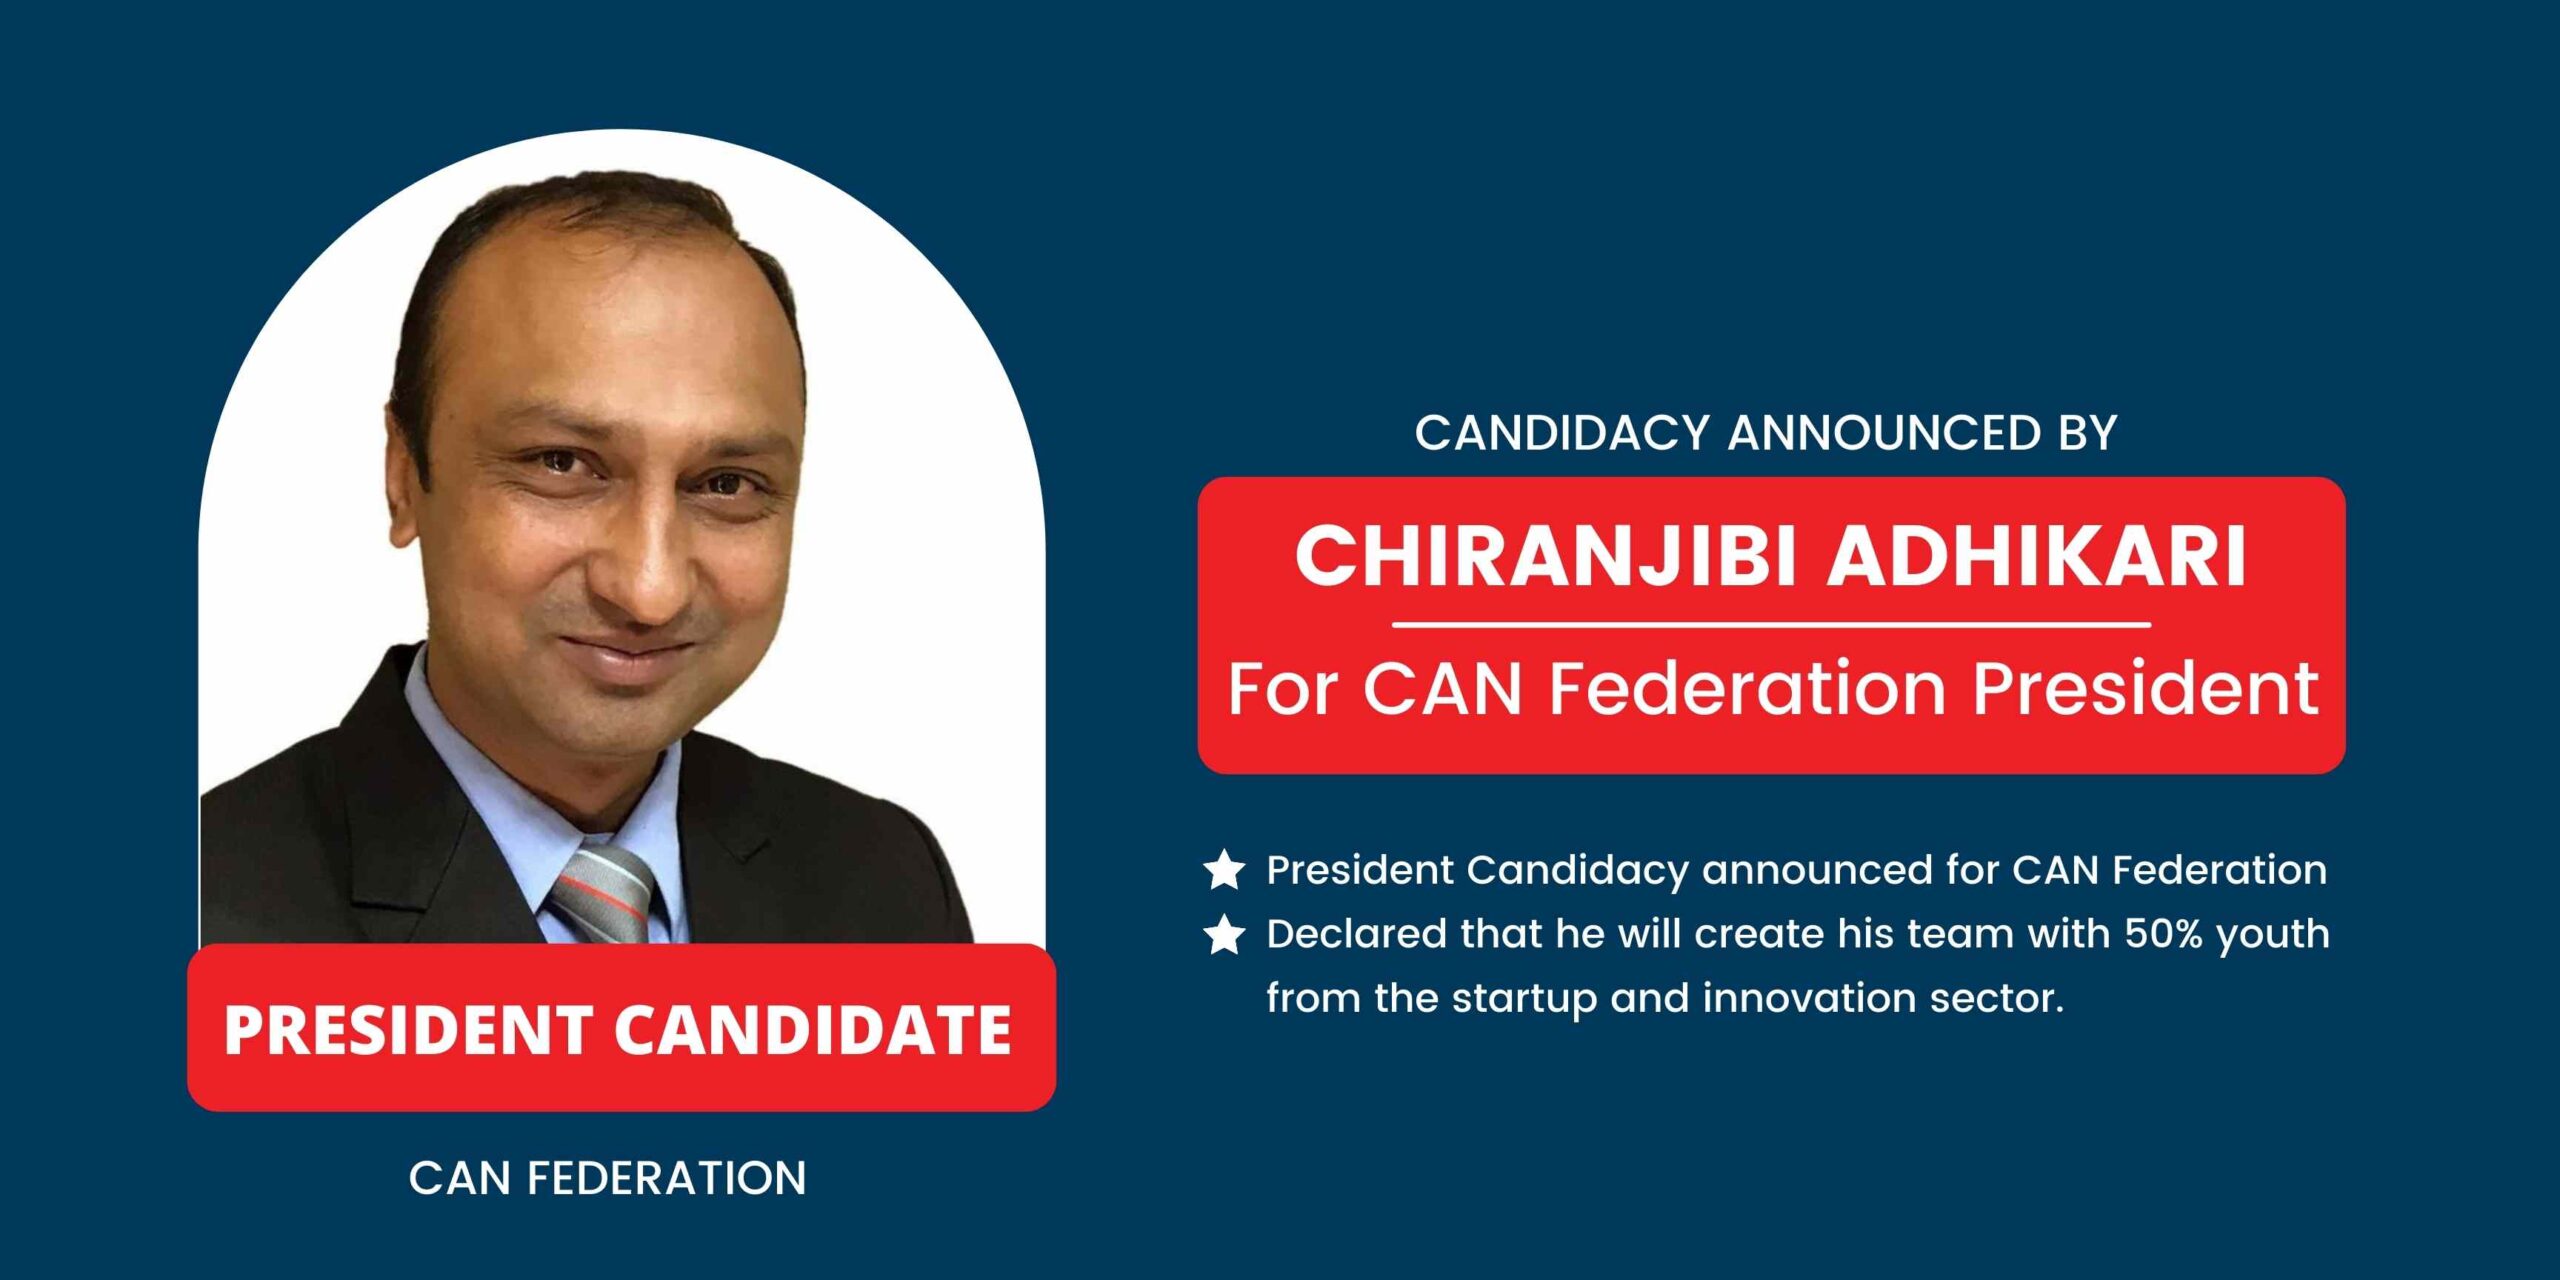 Chiranjibi Adhikari announced his candidacy for President of CAN Federation